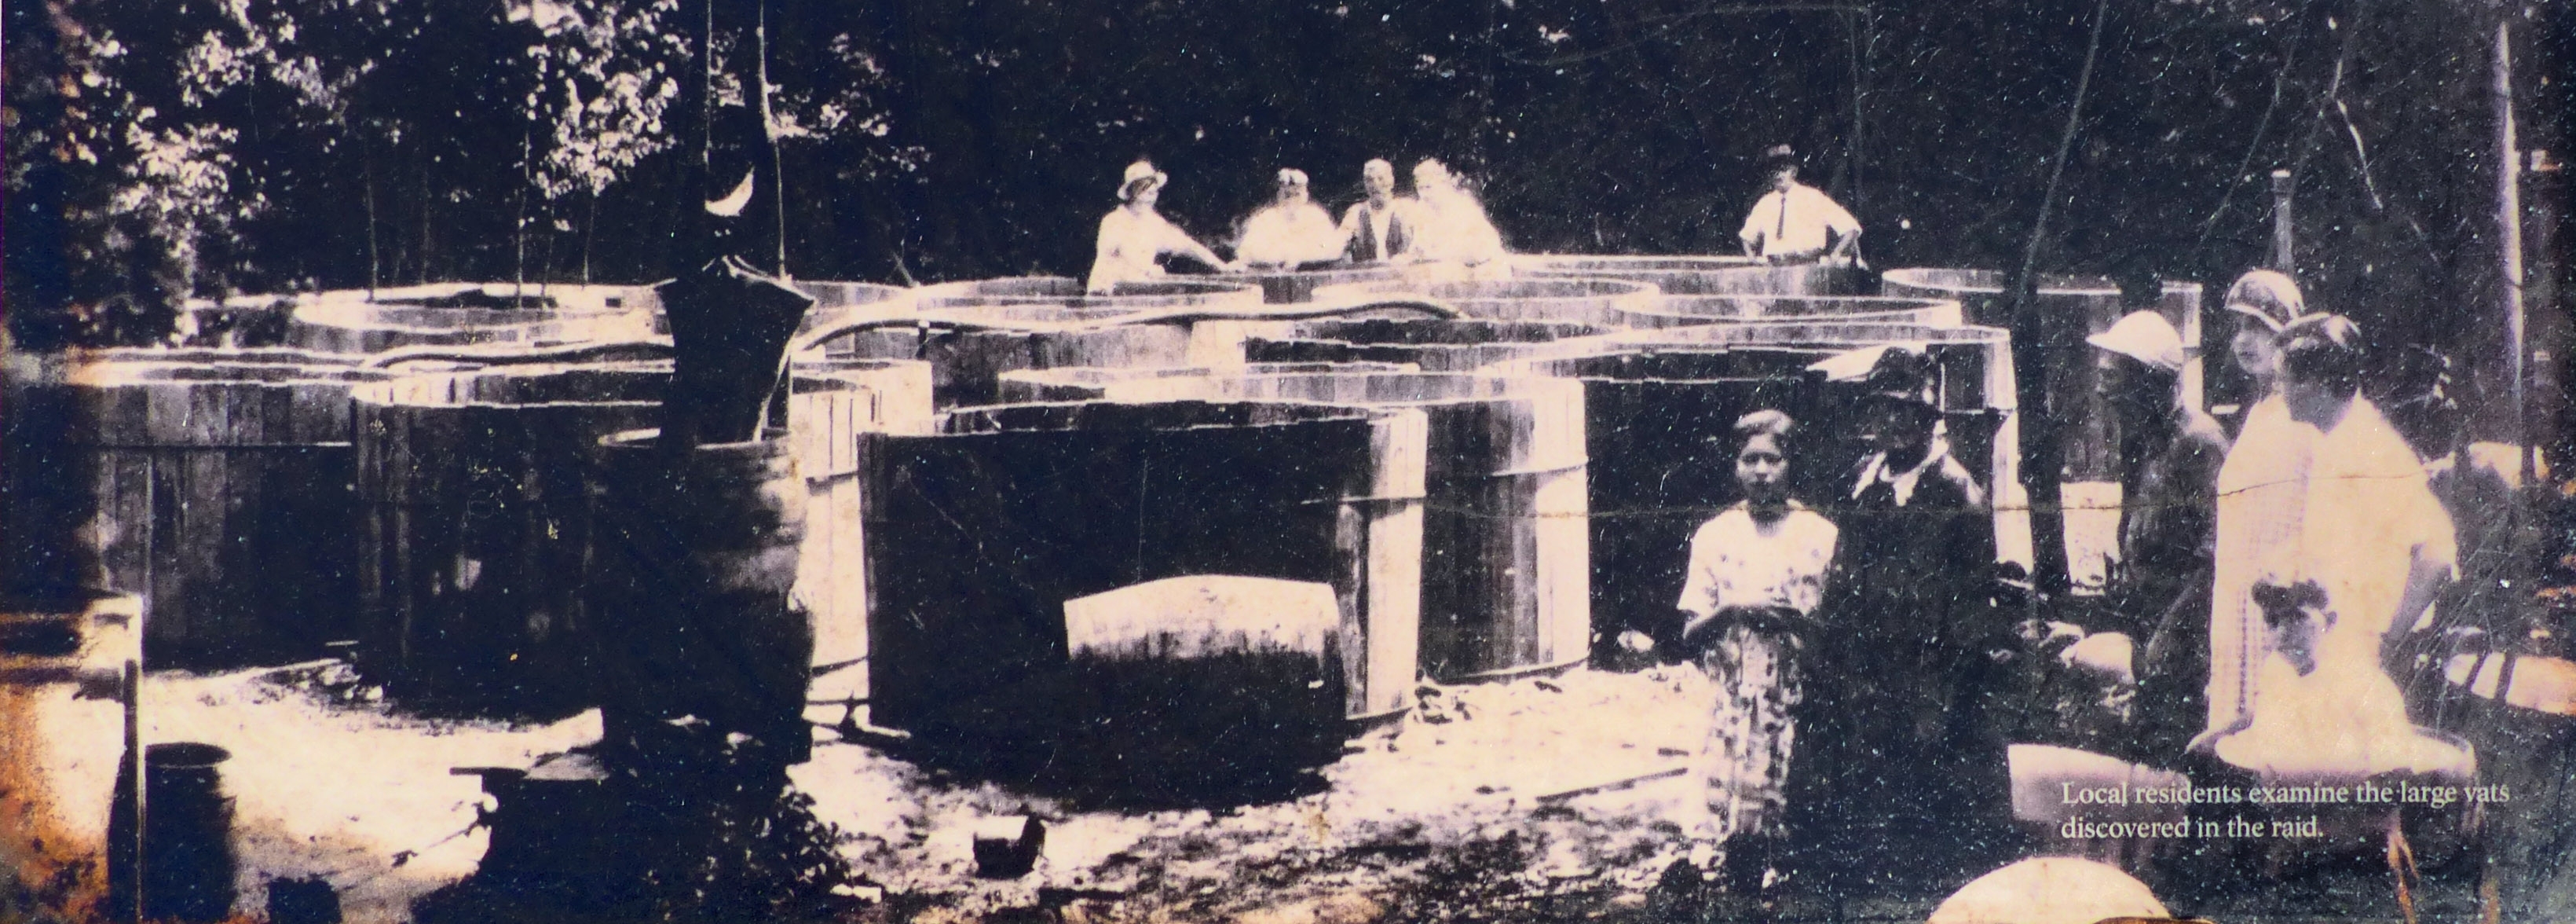 Local Residents examine the large vats discovered in the raid.